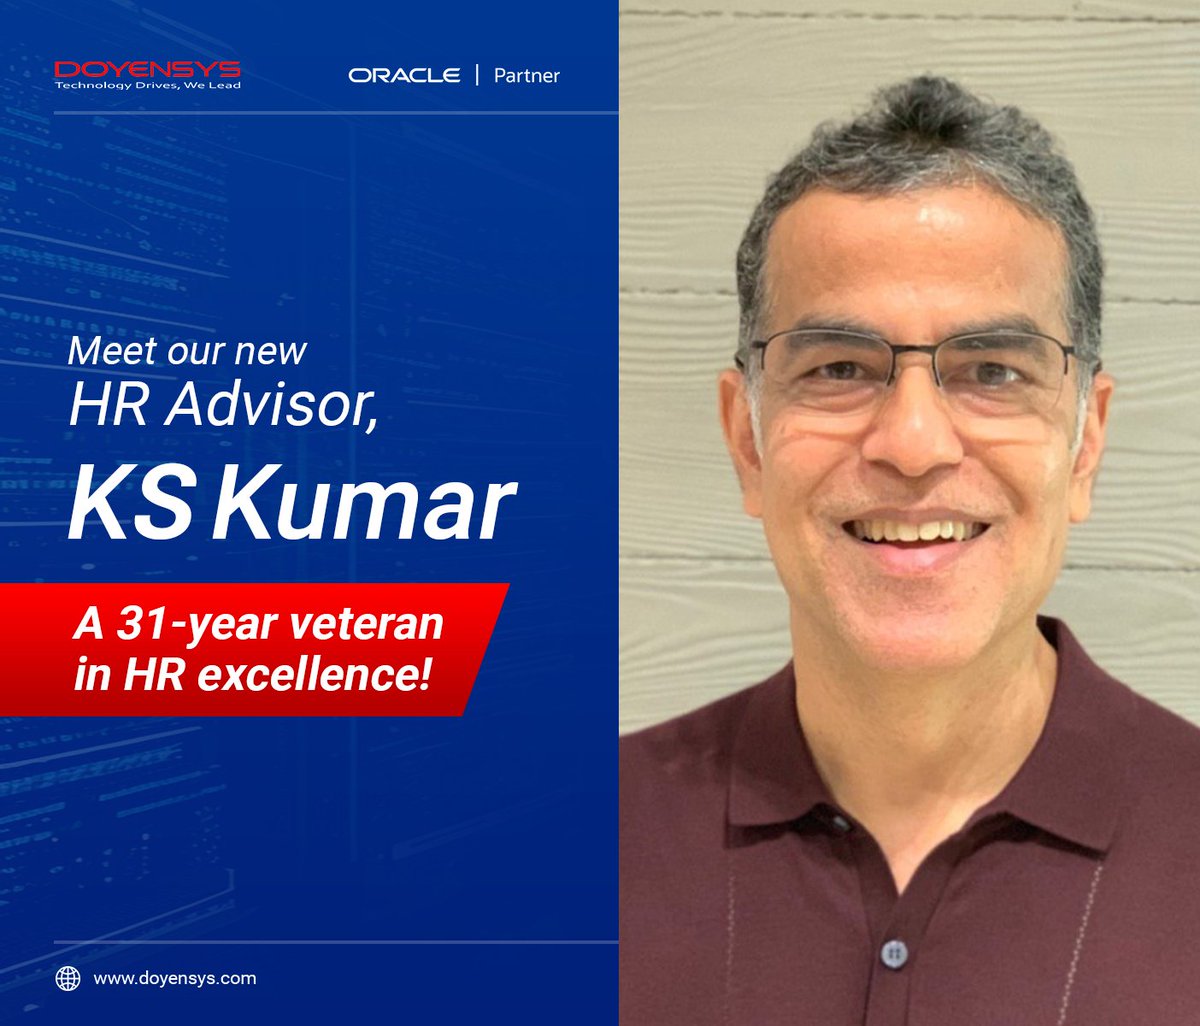 Join us in welcoming Mr. Kumar KS, our new HR Advisor at Doyensys. With 31 years of industry expertise and a stellar background, he's set to lead us to new heights in HR, Leadership Development, and Talent Management. Welcome, Mr. KS Kumar! 🚀🤝 #HRAdvisor #TeamDoyensys